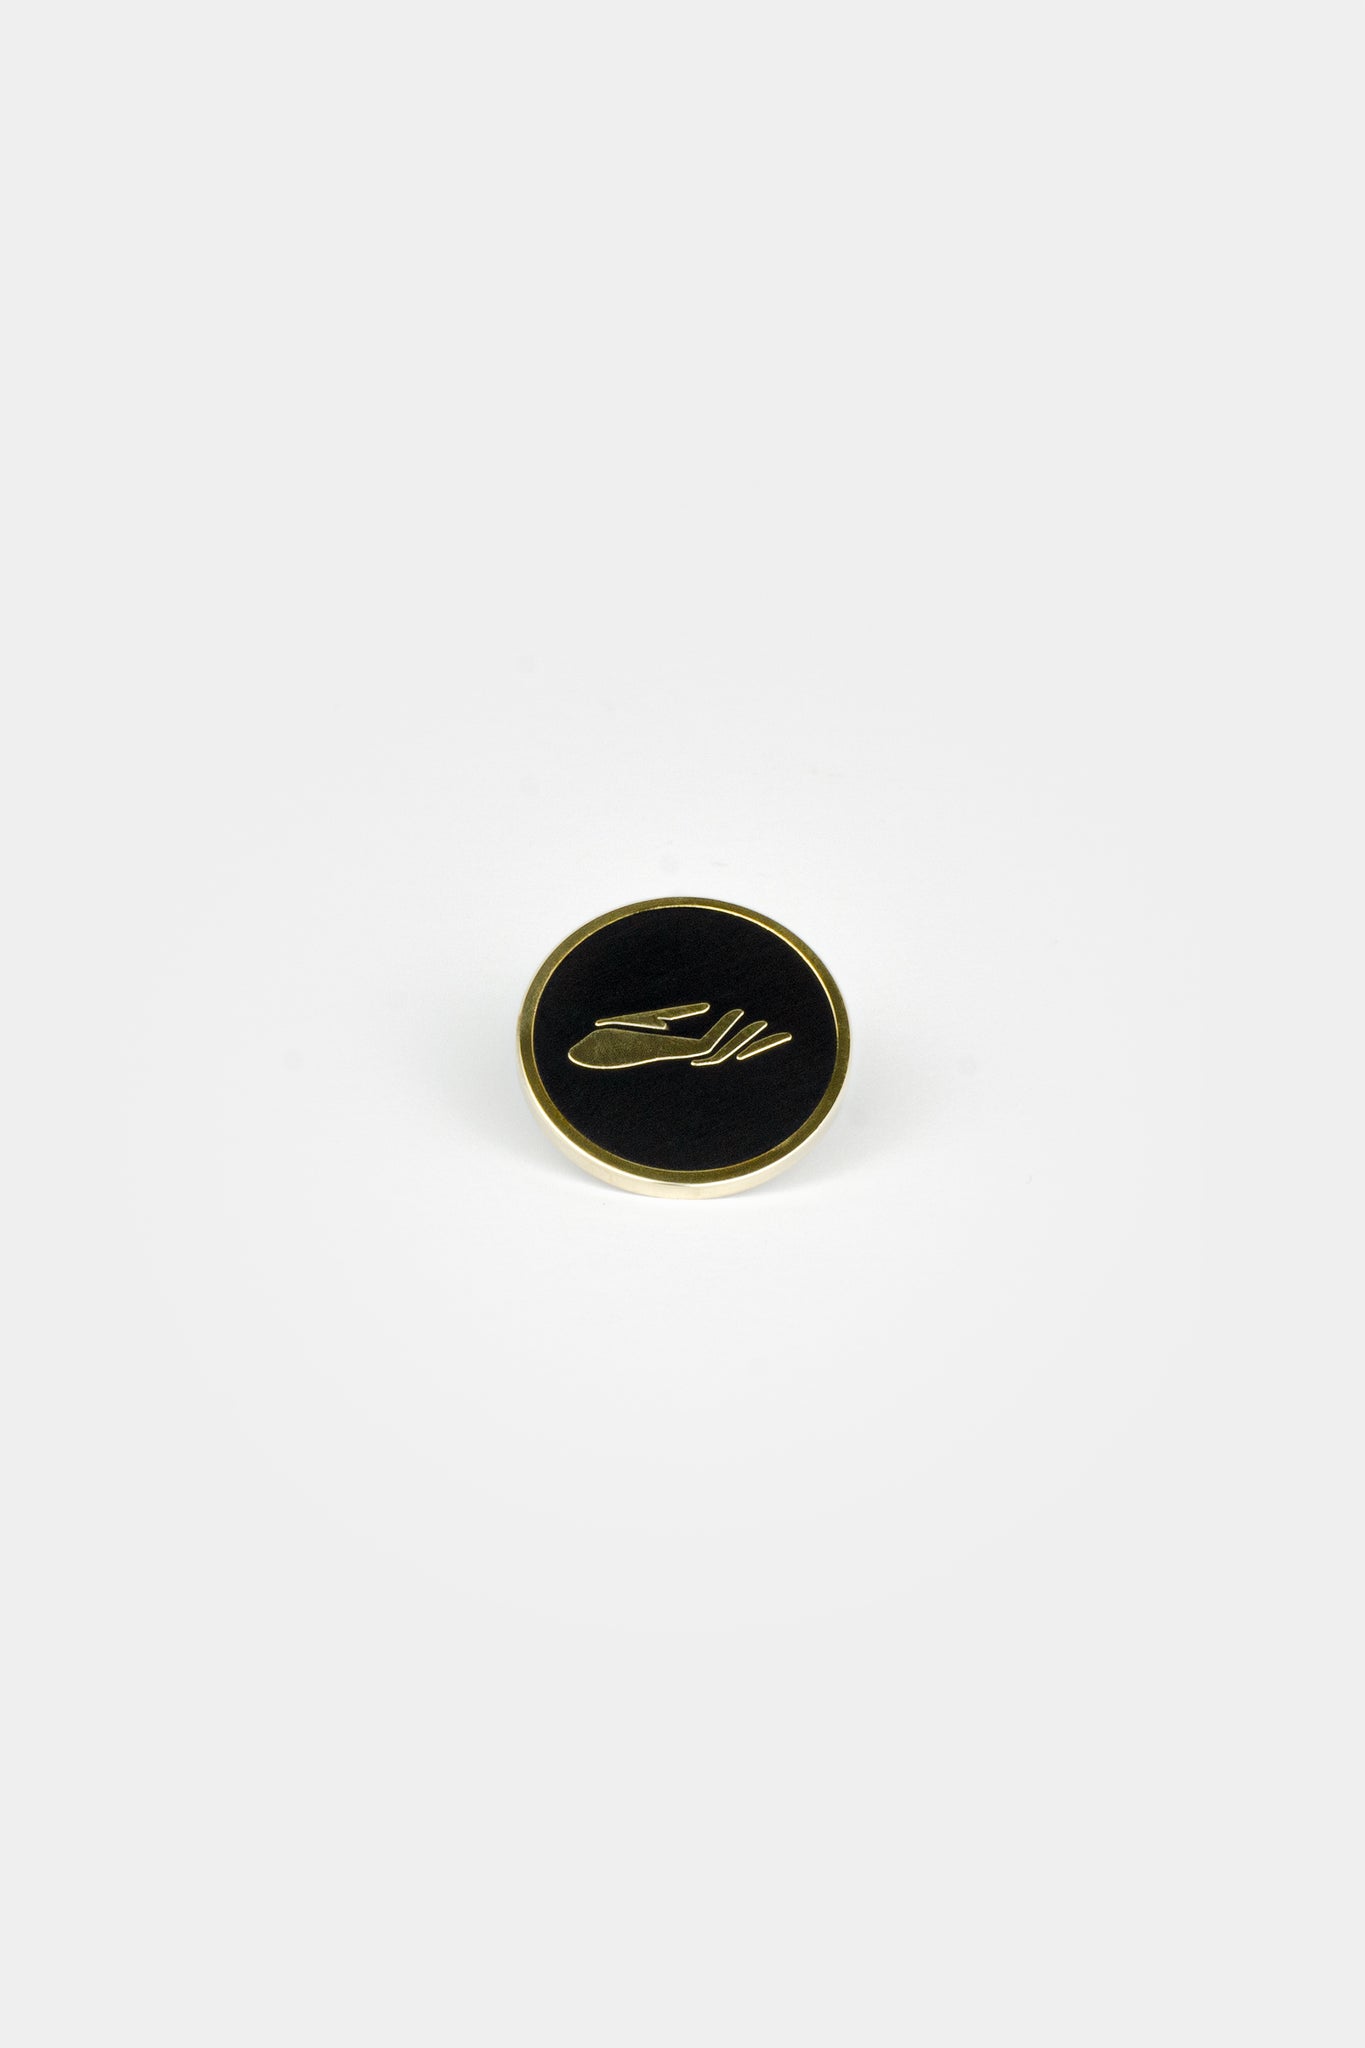 Provide hand logo enamel pin badge in black and gold